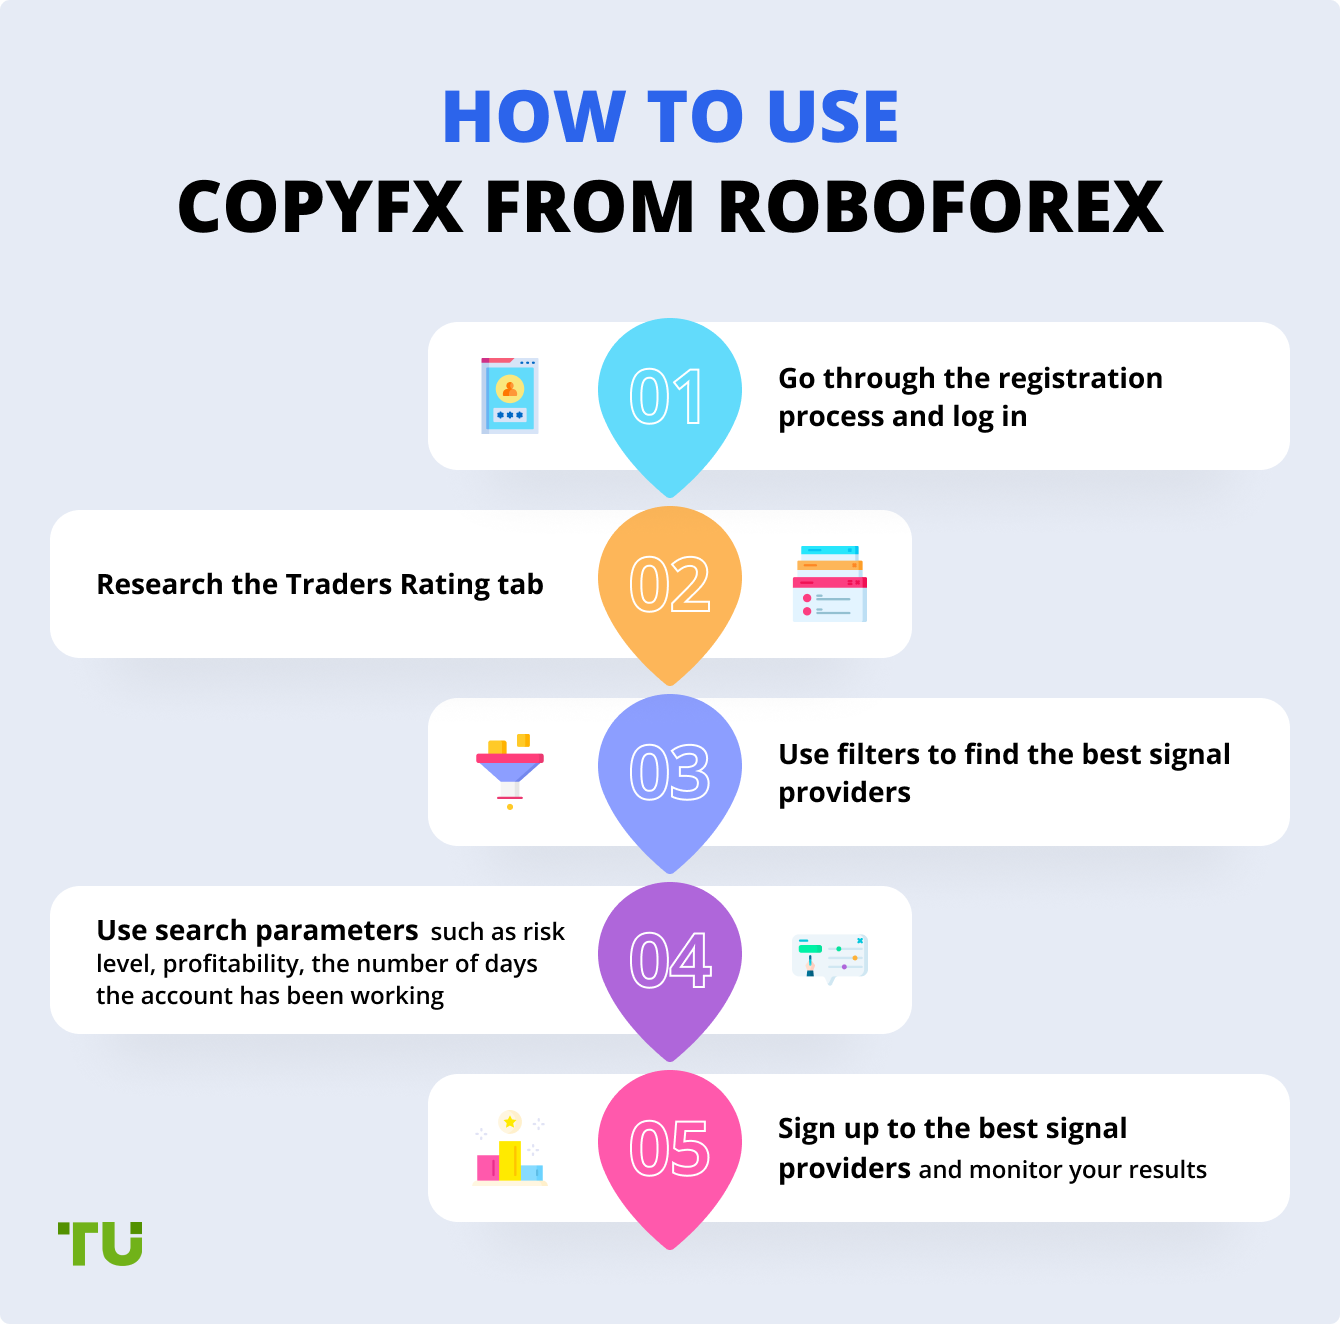 How to Use CopyFX from RoboForex